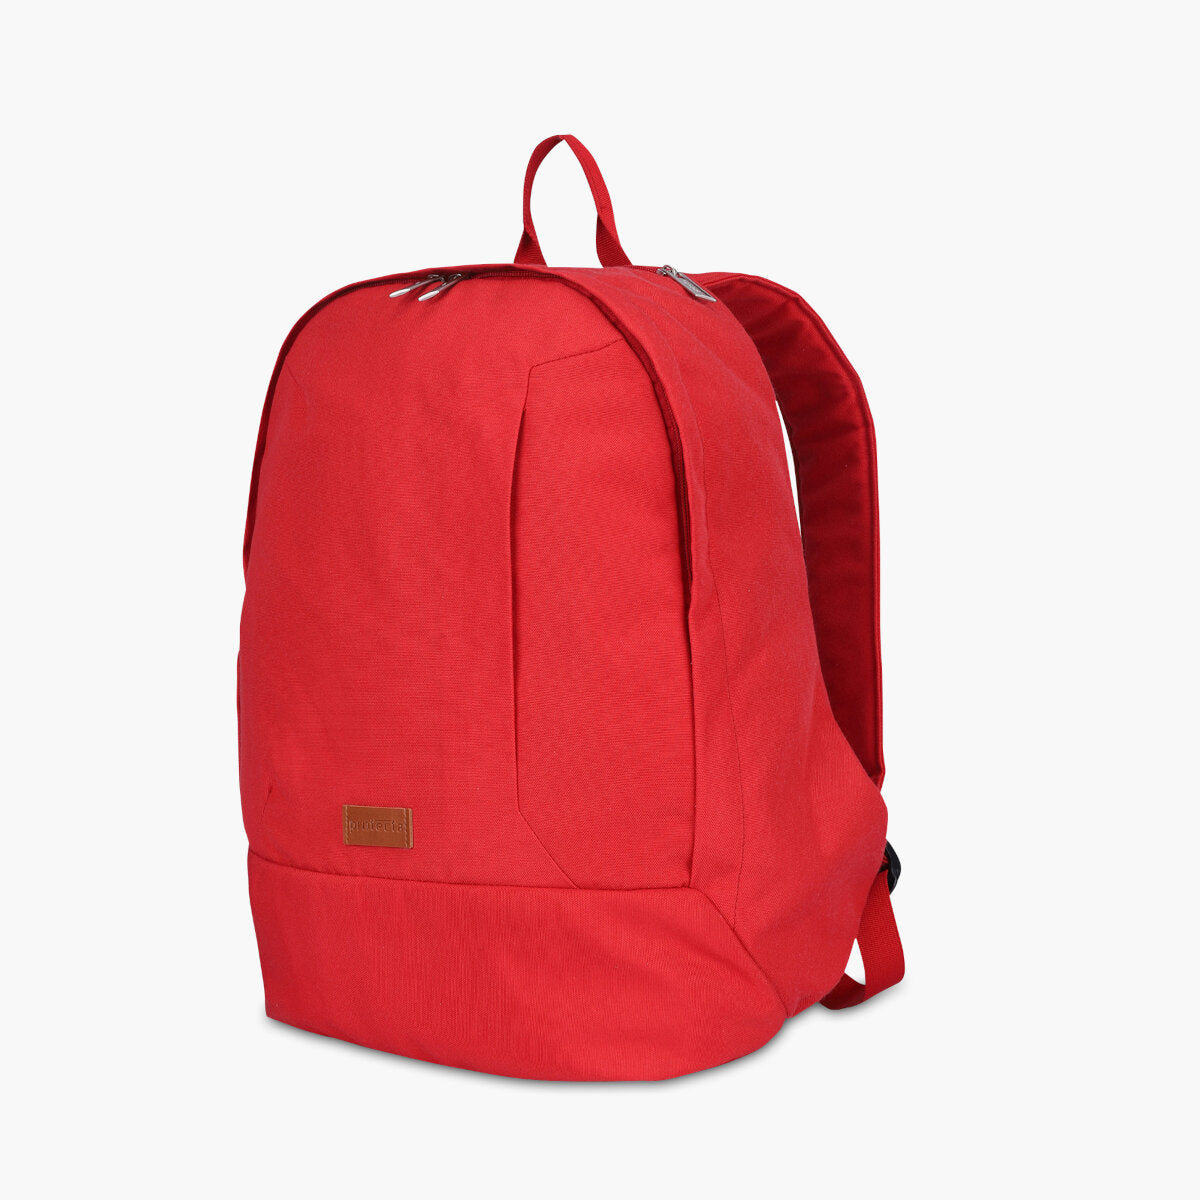 Red | Protecta Steady Progress Laptop Backpack - 2